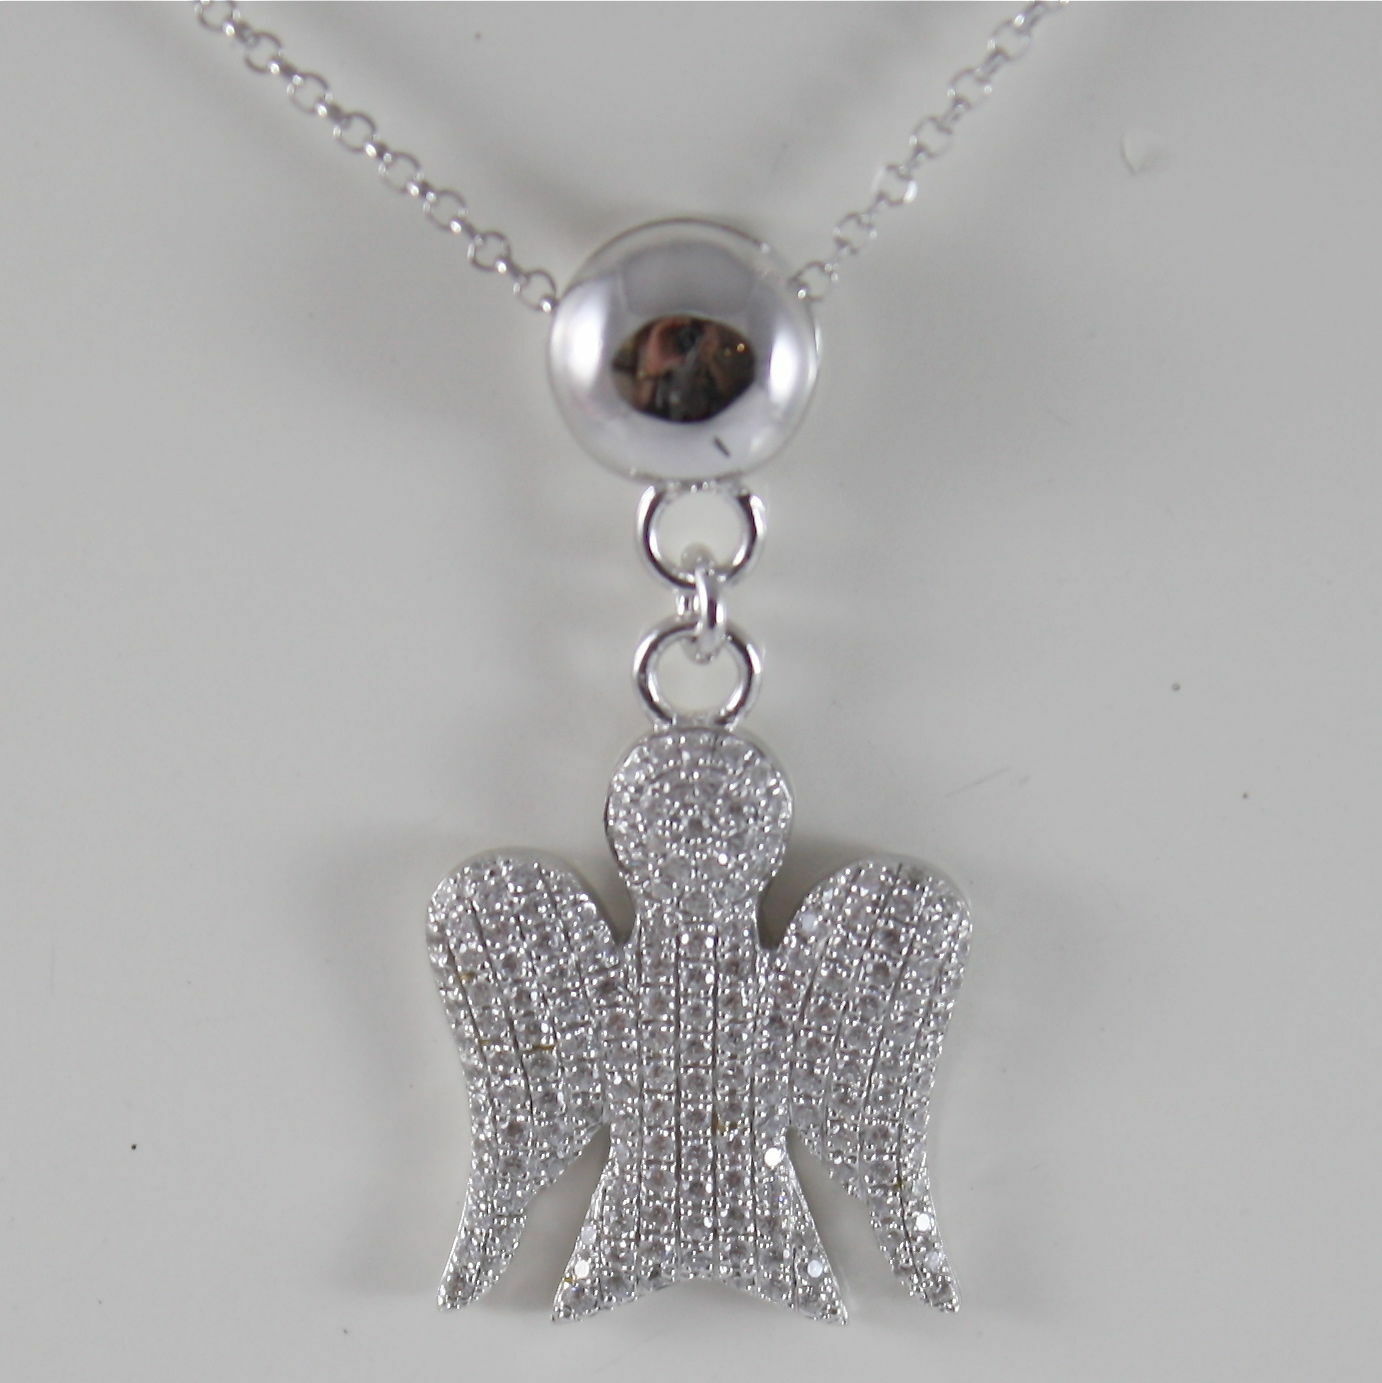 Primary image for 925 SILVER NECKLACE WITH ANGEL PENDANT GIA100 MADE IN ITALY BY ROBERTO GIANNOTTI